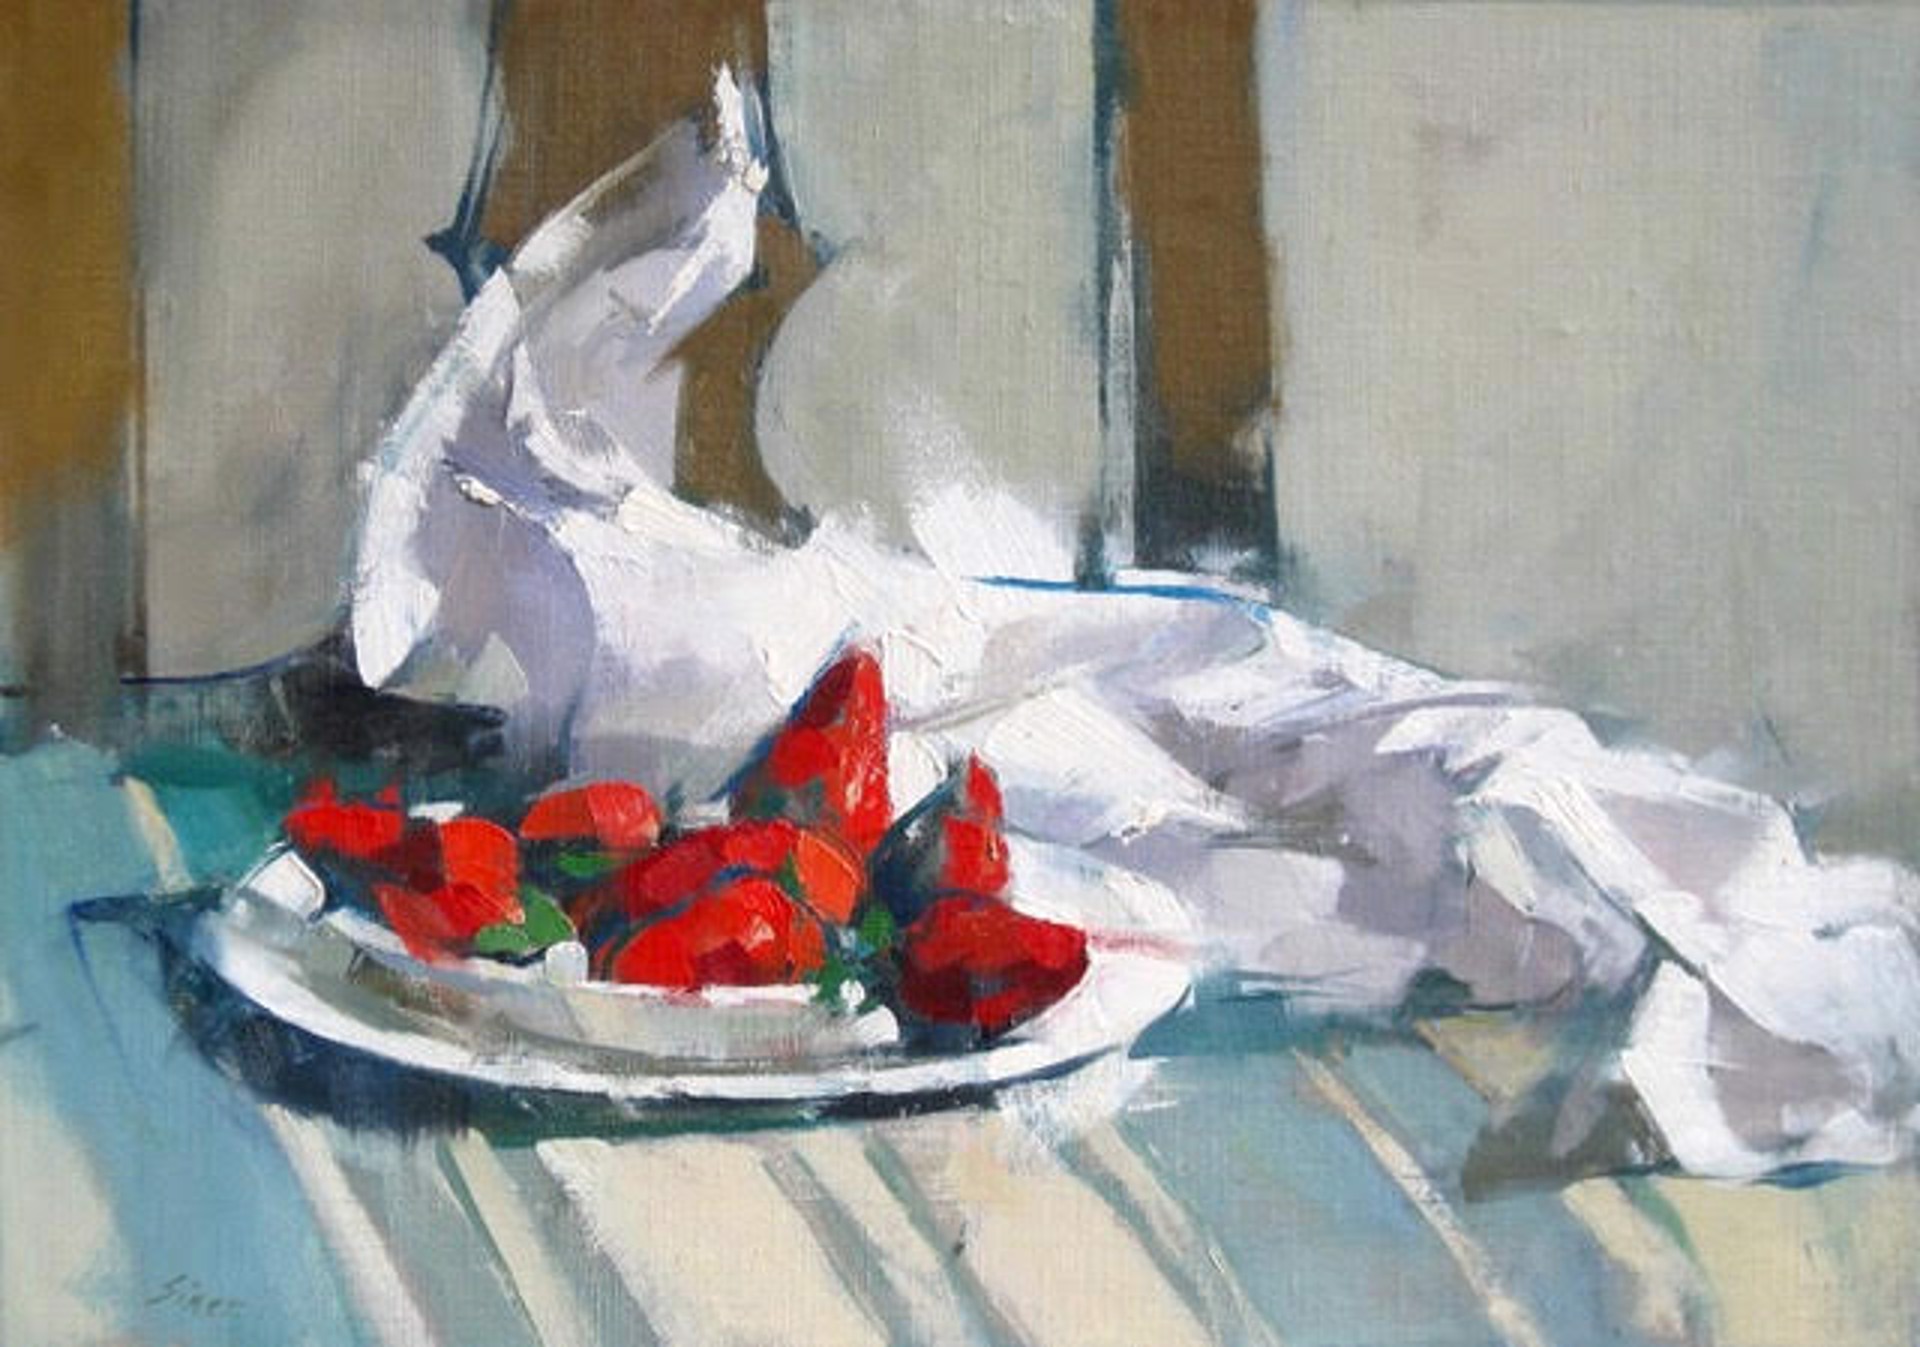 Strawberries on Chair by Maggie Siner